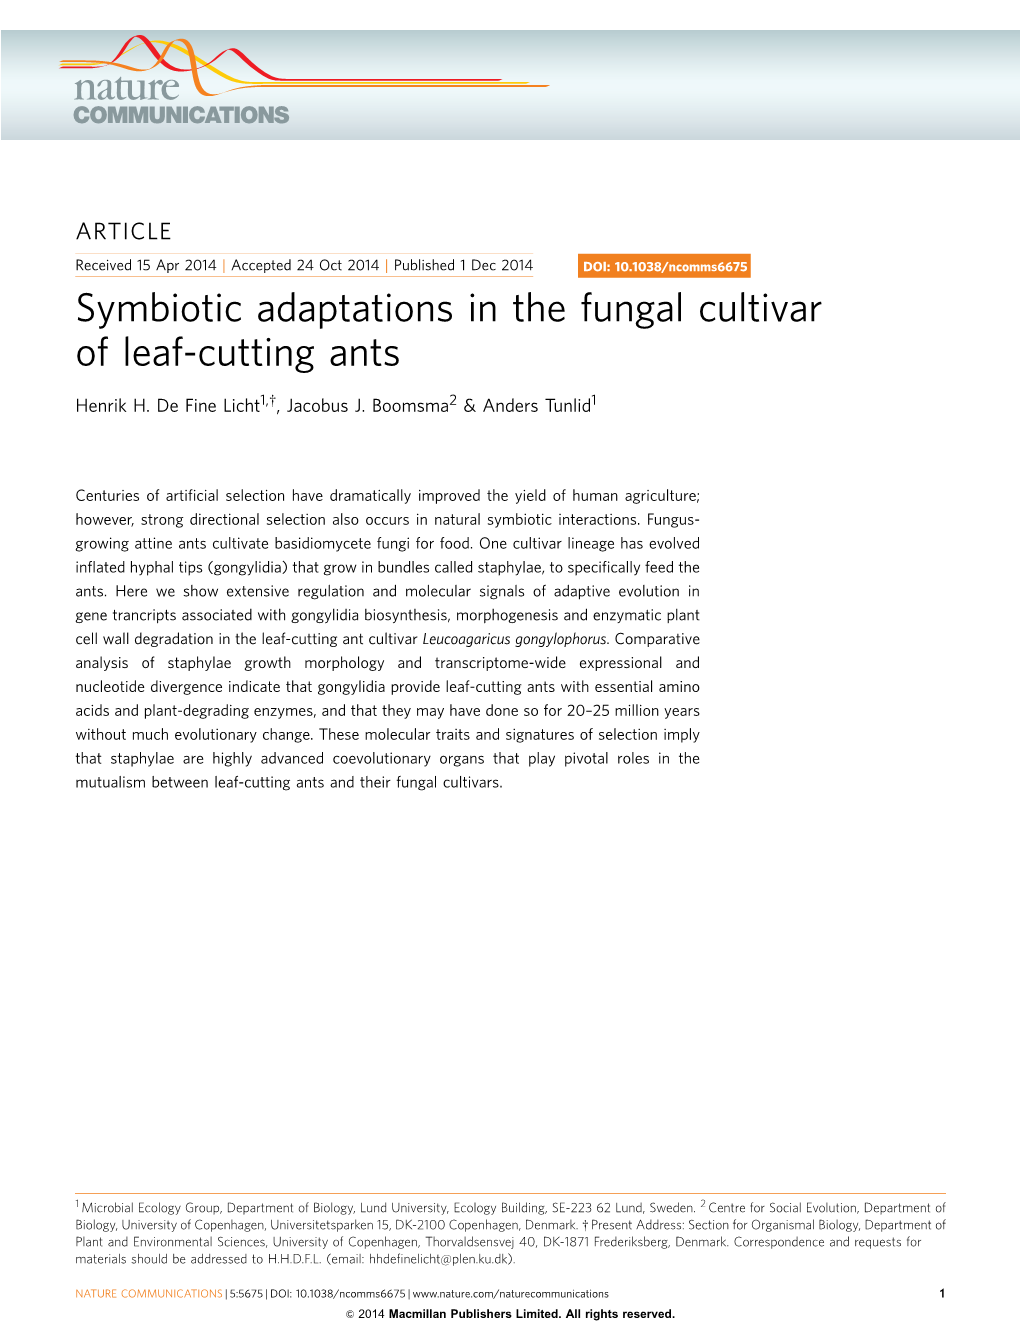 Symbiotic Adaptations in the Fungal Cultivar of Leaf-Cutting Ants